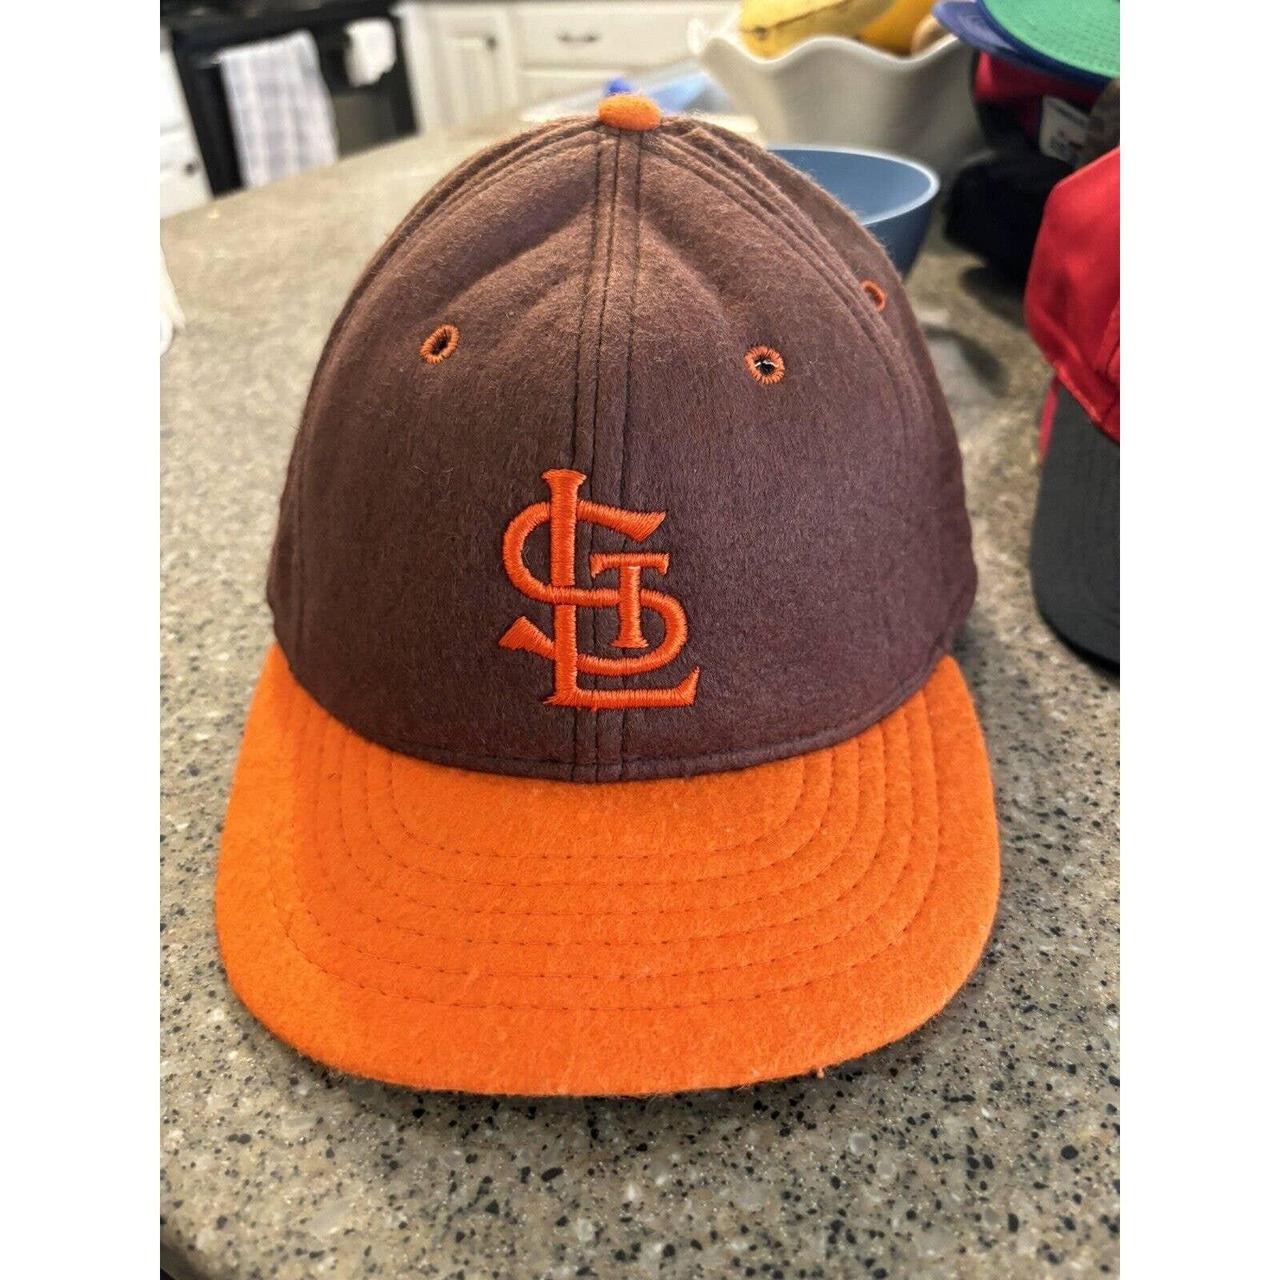 St Louis Browns, cap, new era 59fifty, size 7and1/8, - Depop